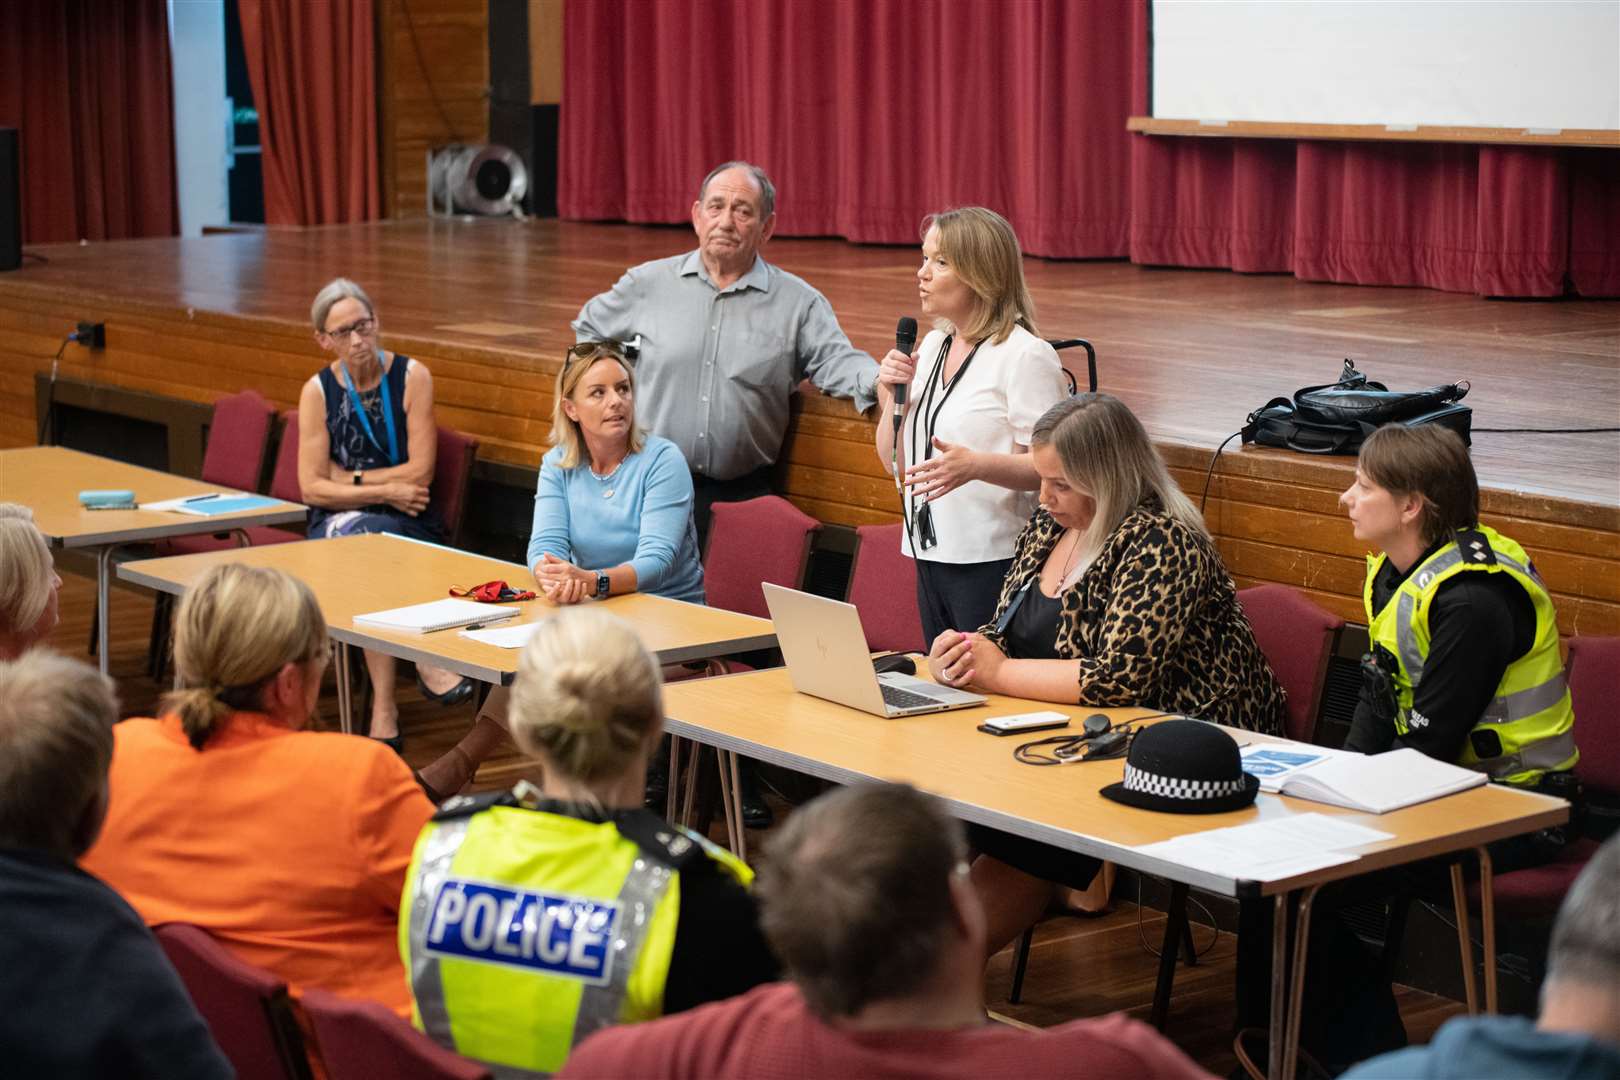 Karen Birse, the council's refugee and resettlement officer, addressed the audience, flanked by representatives form the NHS, the police and Elgin Community Council. All photos: Daniel Forsyth